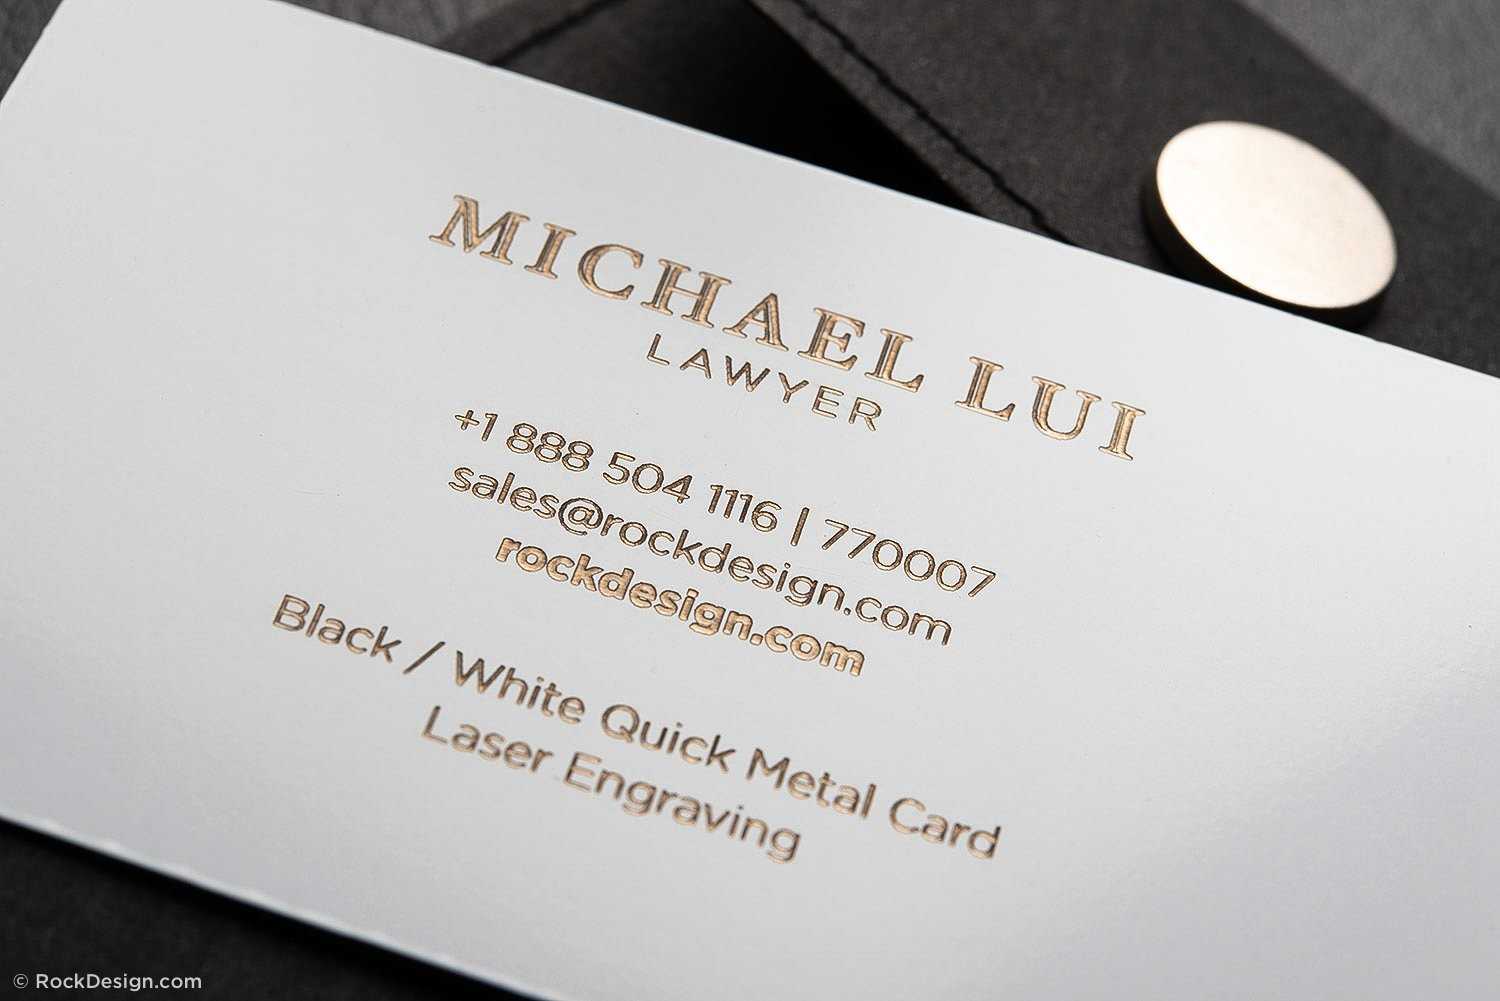 Lawyer Business Cards Templates | Creative Atoms Within Legal Business Cards Templates Free